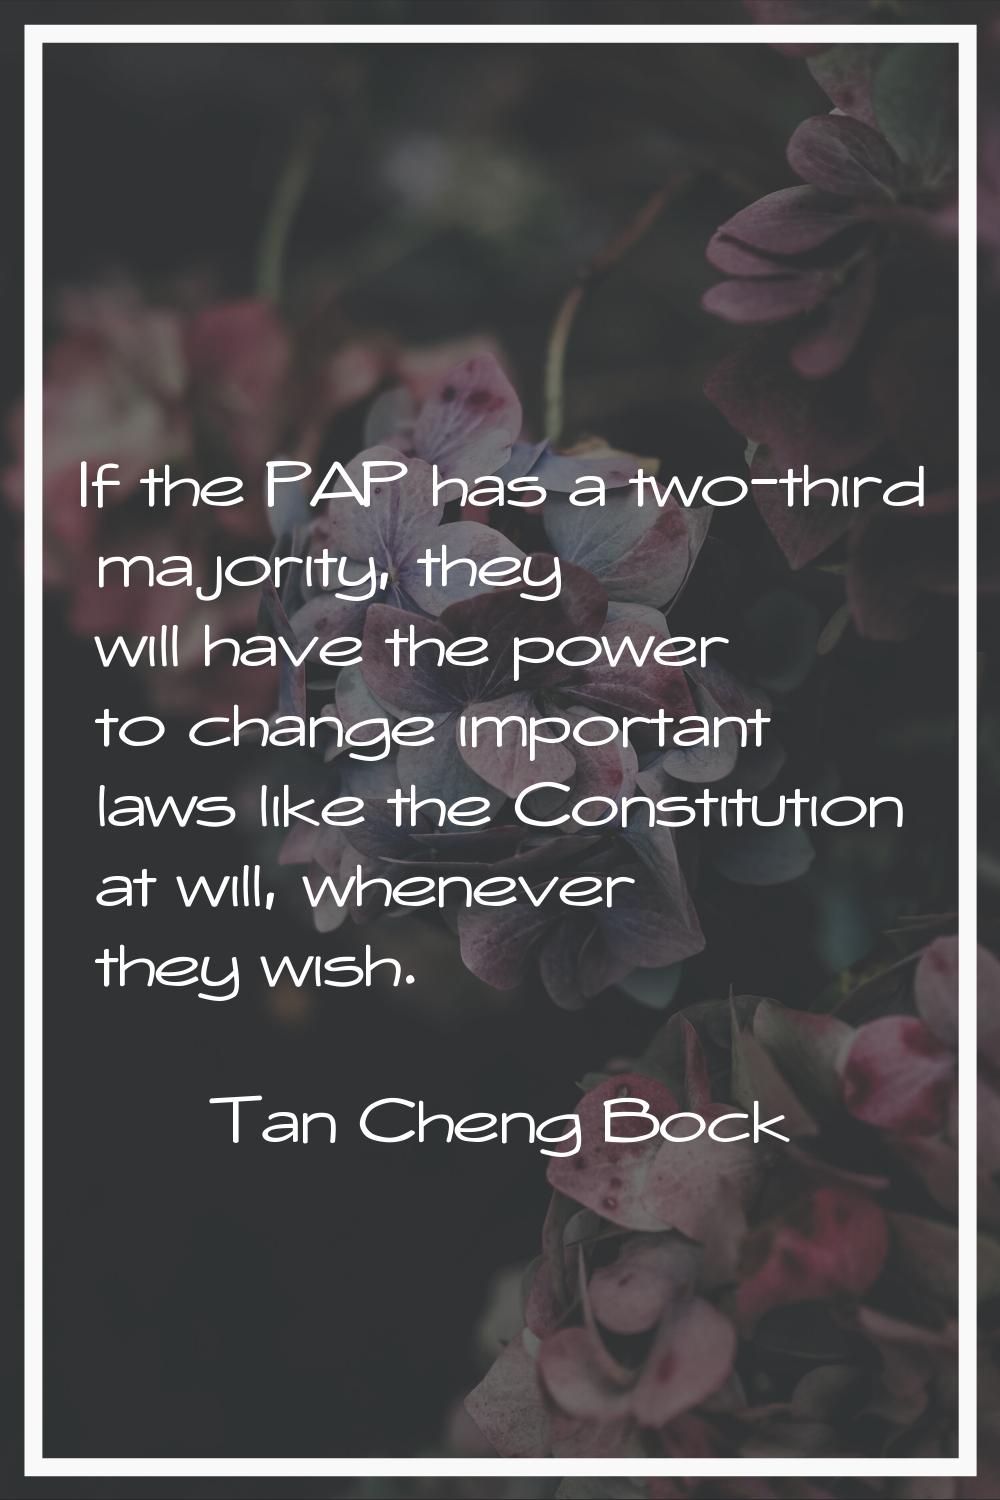 If the PAP has a two-third majority, they will have the power to change important laws like the Con